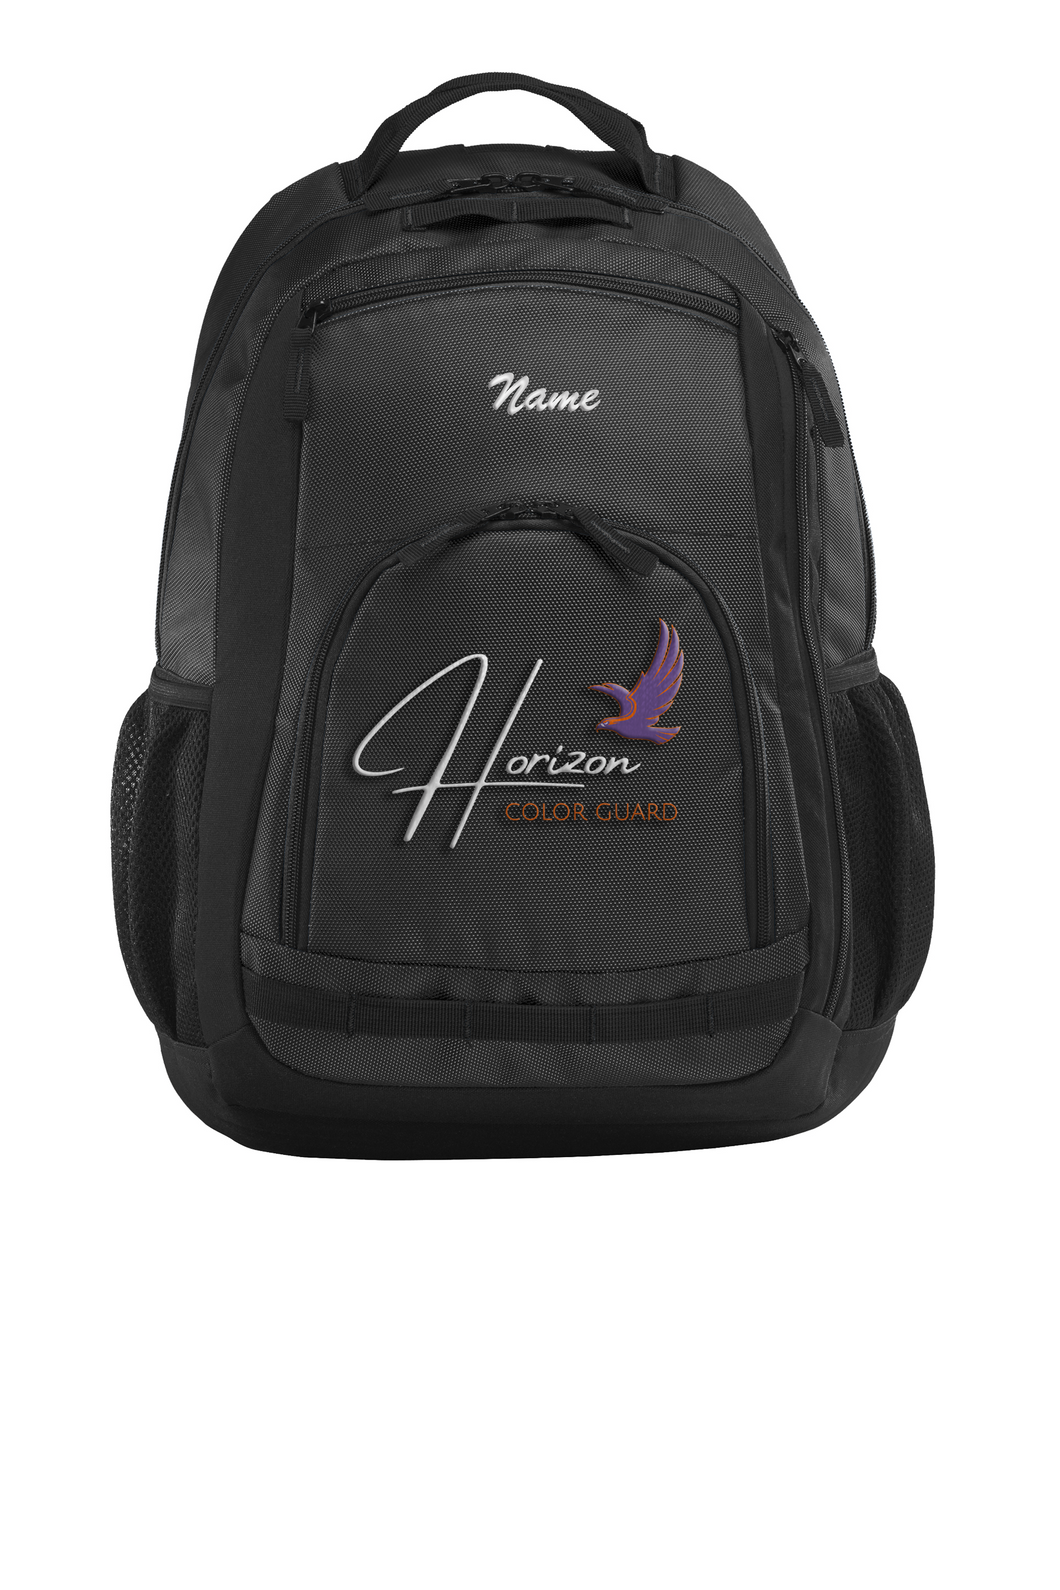 Horizon Ripstop Backpack w/ Name & Logo Embroidery